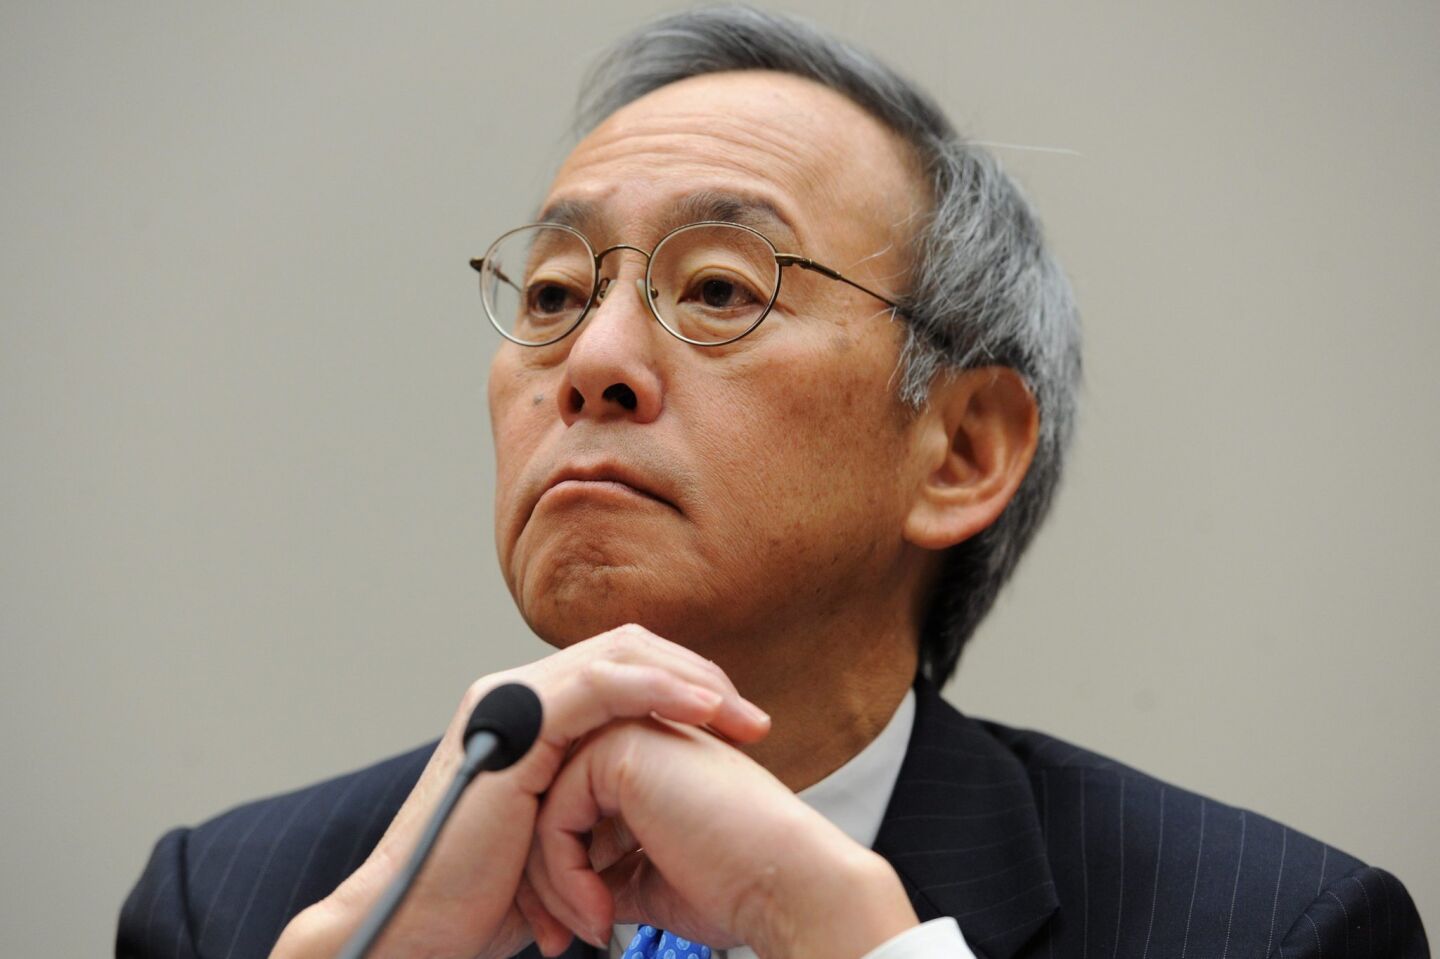 Physicist Steven Chu served as secretary of Energy from 2009 to 2013, persistently advocating for research into alternative fuels and becoming the first cabinet member with a Nobel Prize. Chu is returning to Stanford as a professor of physics and molecular and cellular physiology.